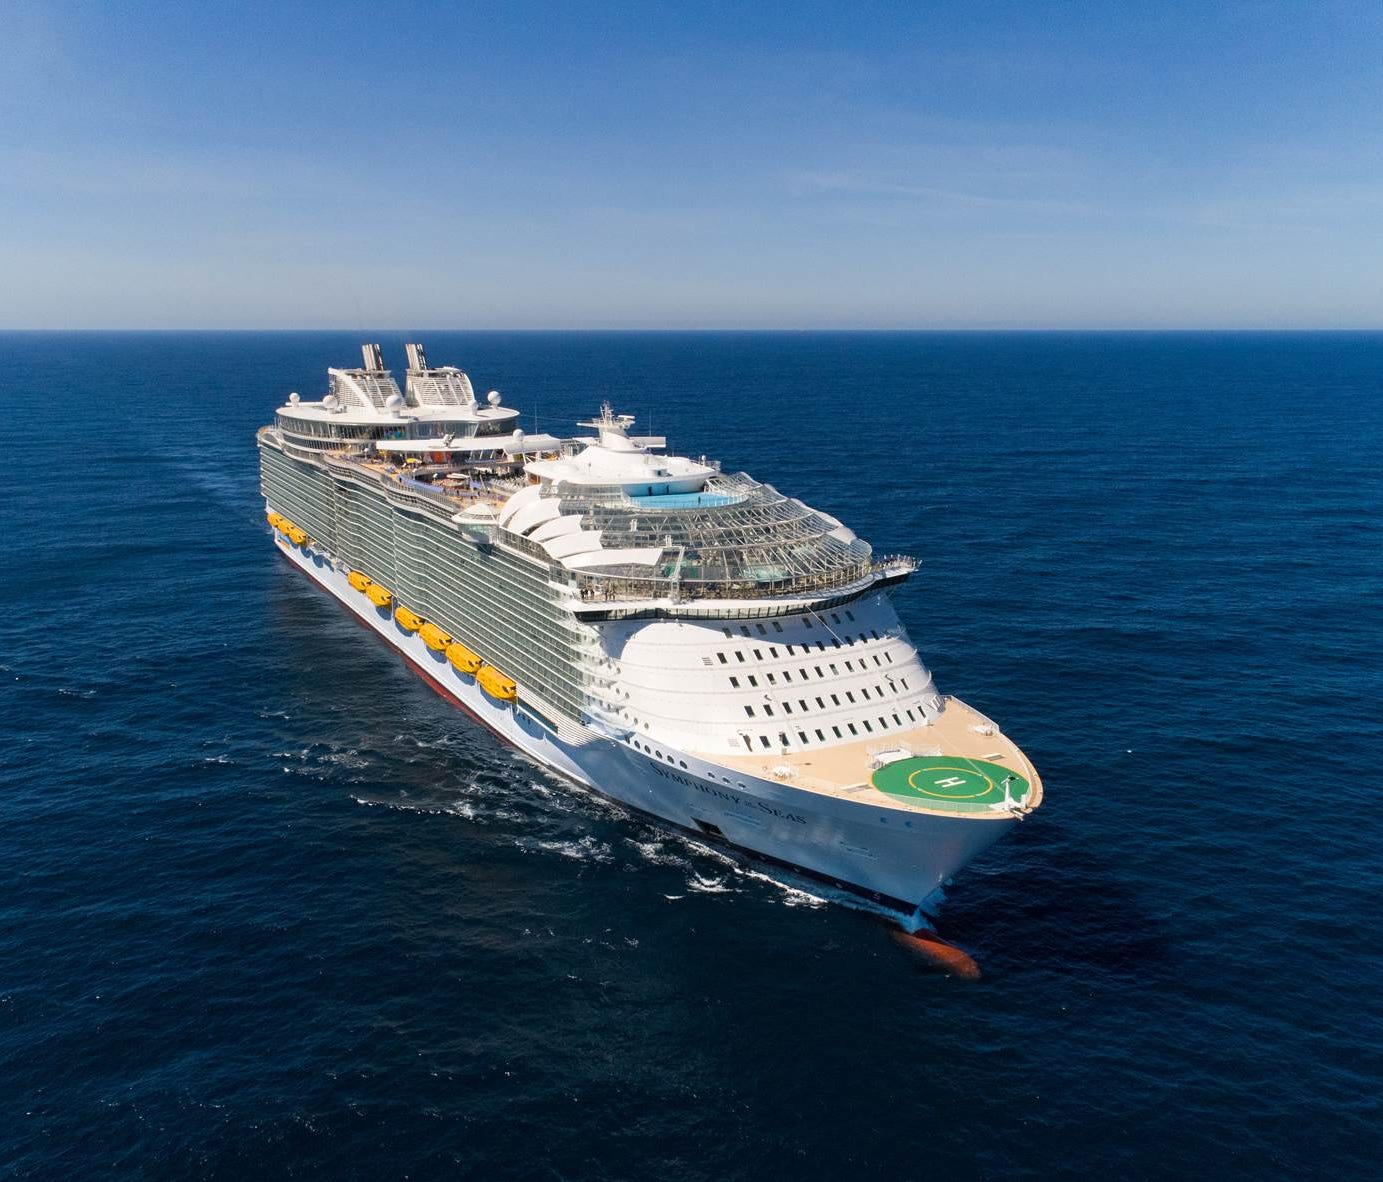 1. Symphony of the Seas. Unveiled in March 2018, Symphony measures 228,081 gross tons, a new record for a cruise vessel.